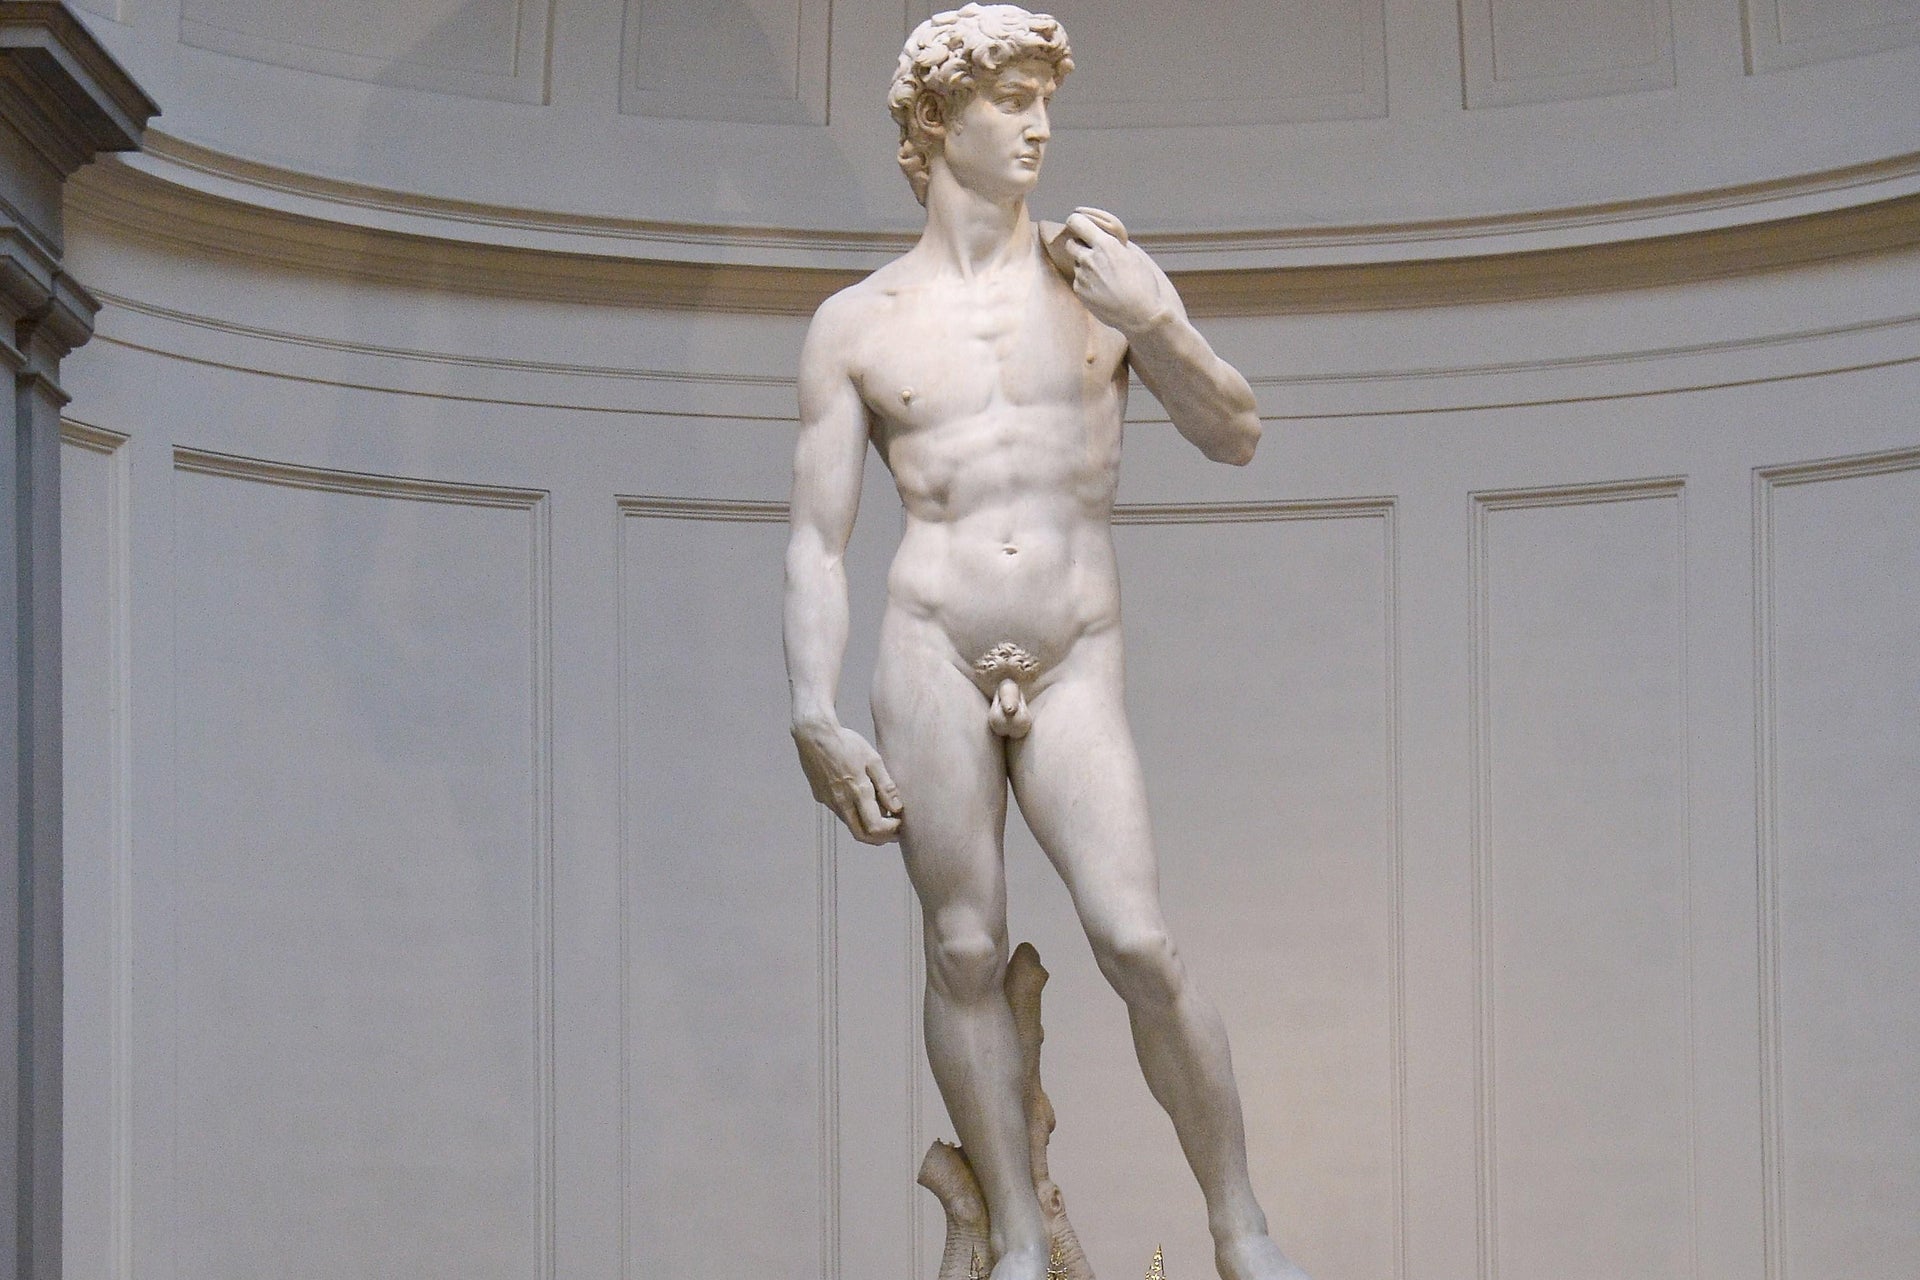 Meet the School Board Chair Who Forced Out a Principal After Michelangelo’s David Was Shown in Class (slate.com)